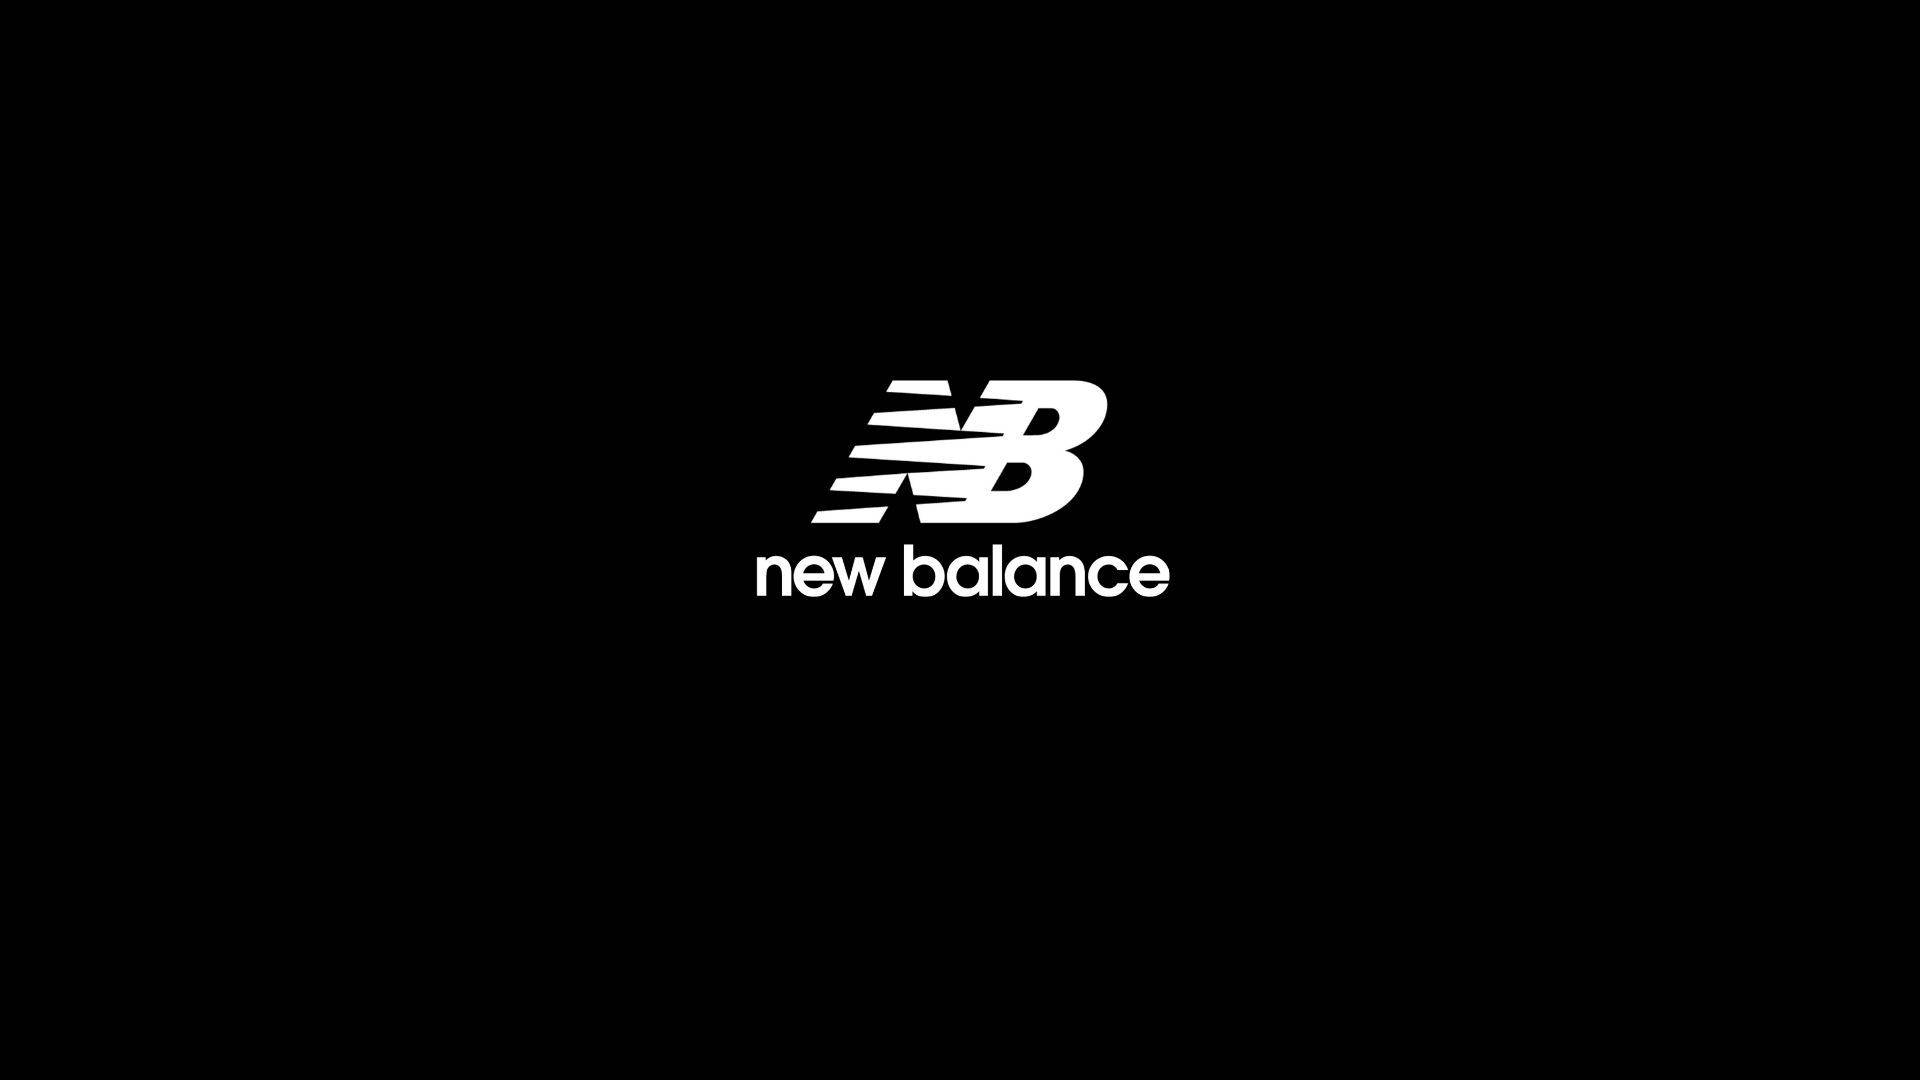 41 New Balance Wallpapers & Backgrounds For FREE | Wallpapers.com